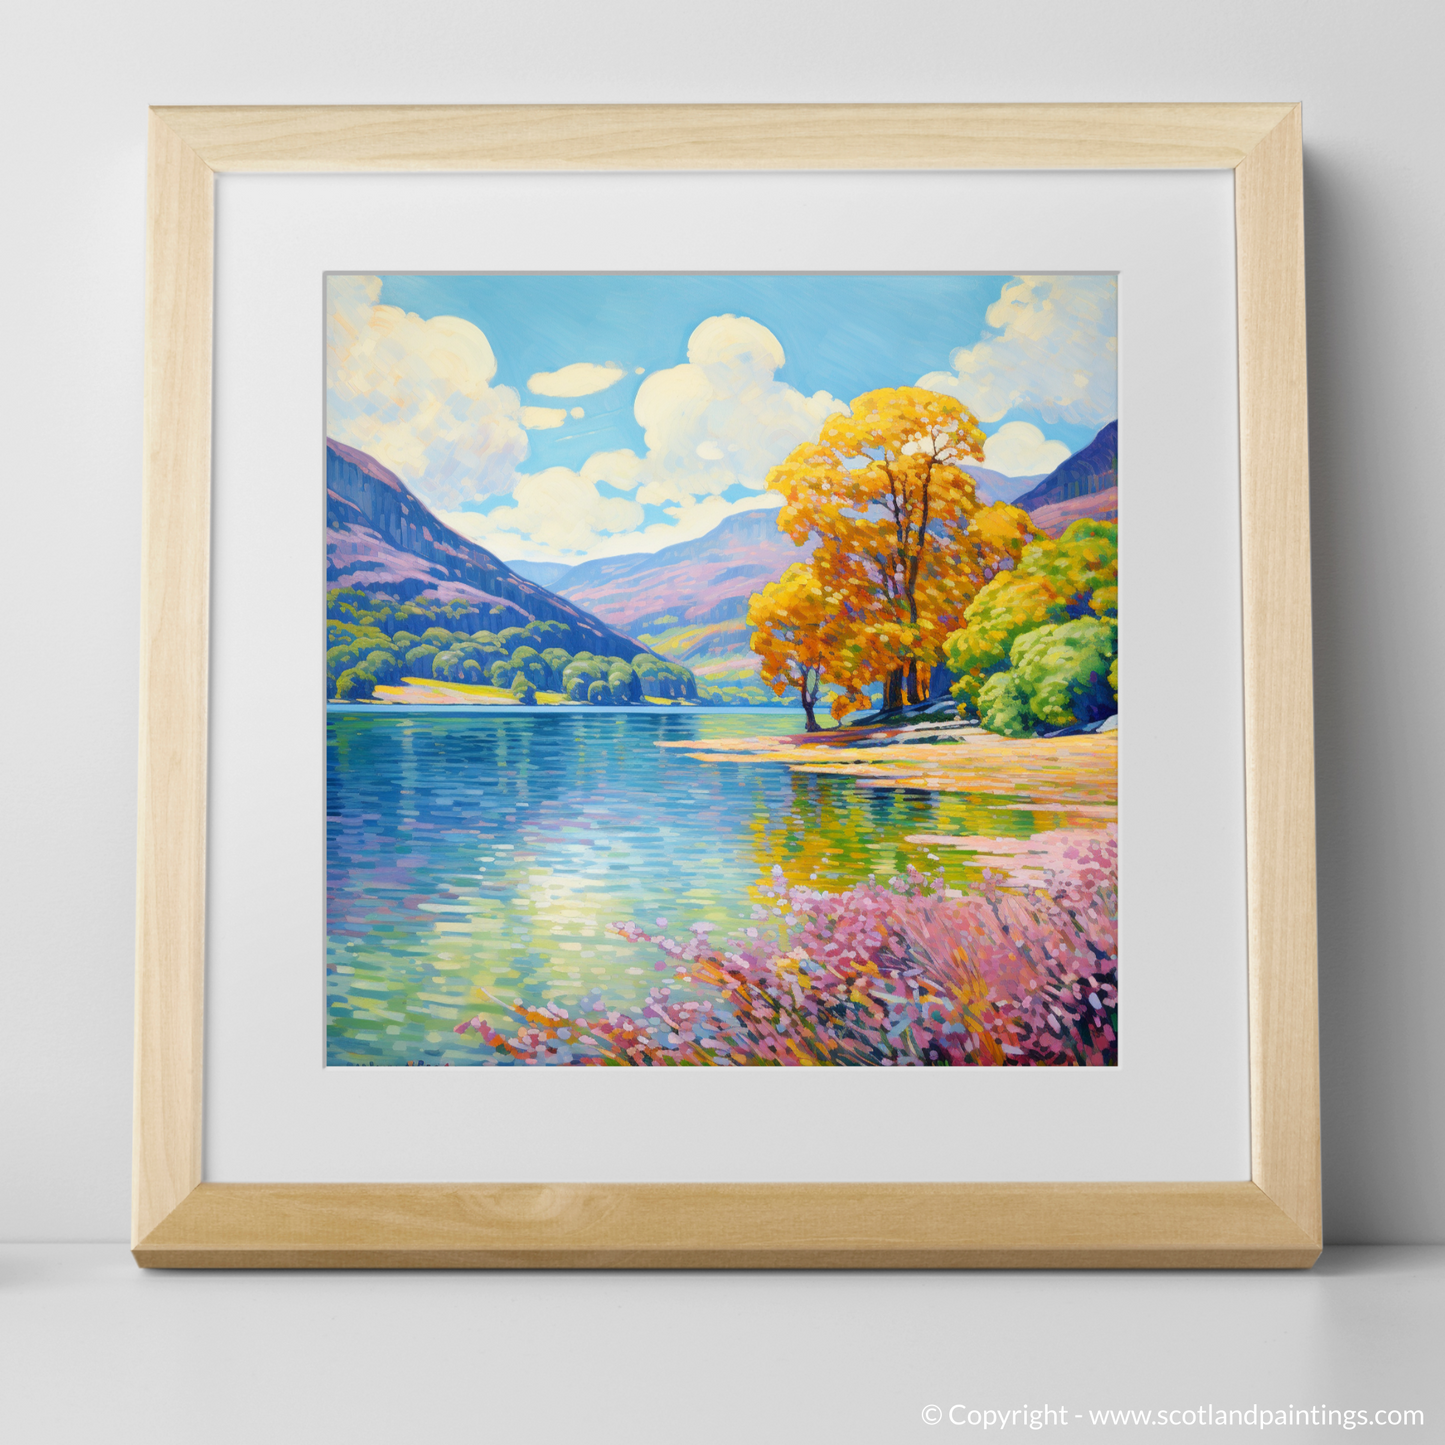 Painting and Art Print of Loch Earn, Perth and Kinross in summer. Summer Serenity at Loch Earn.